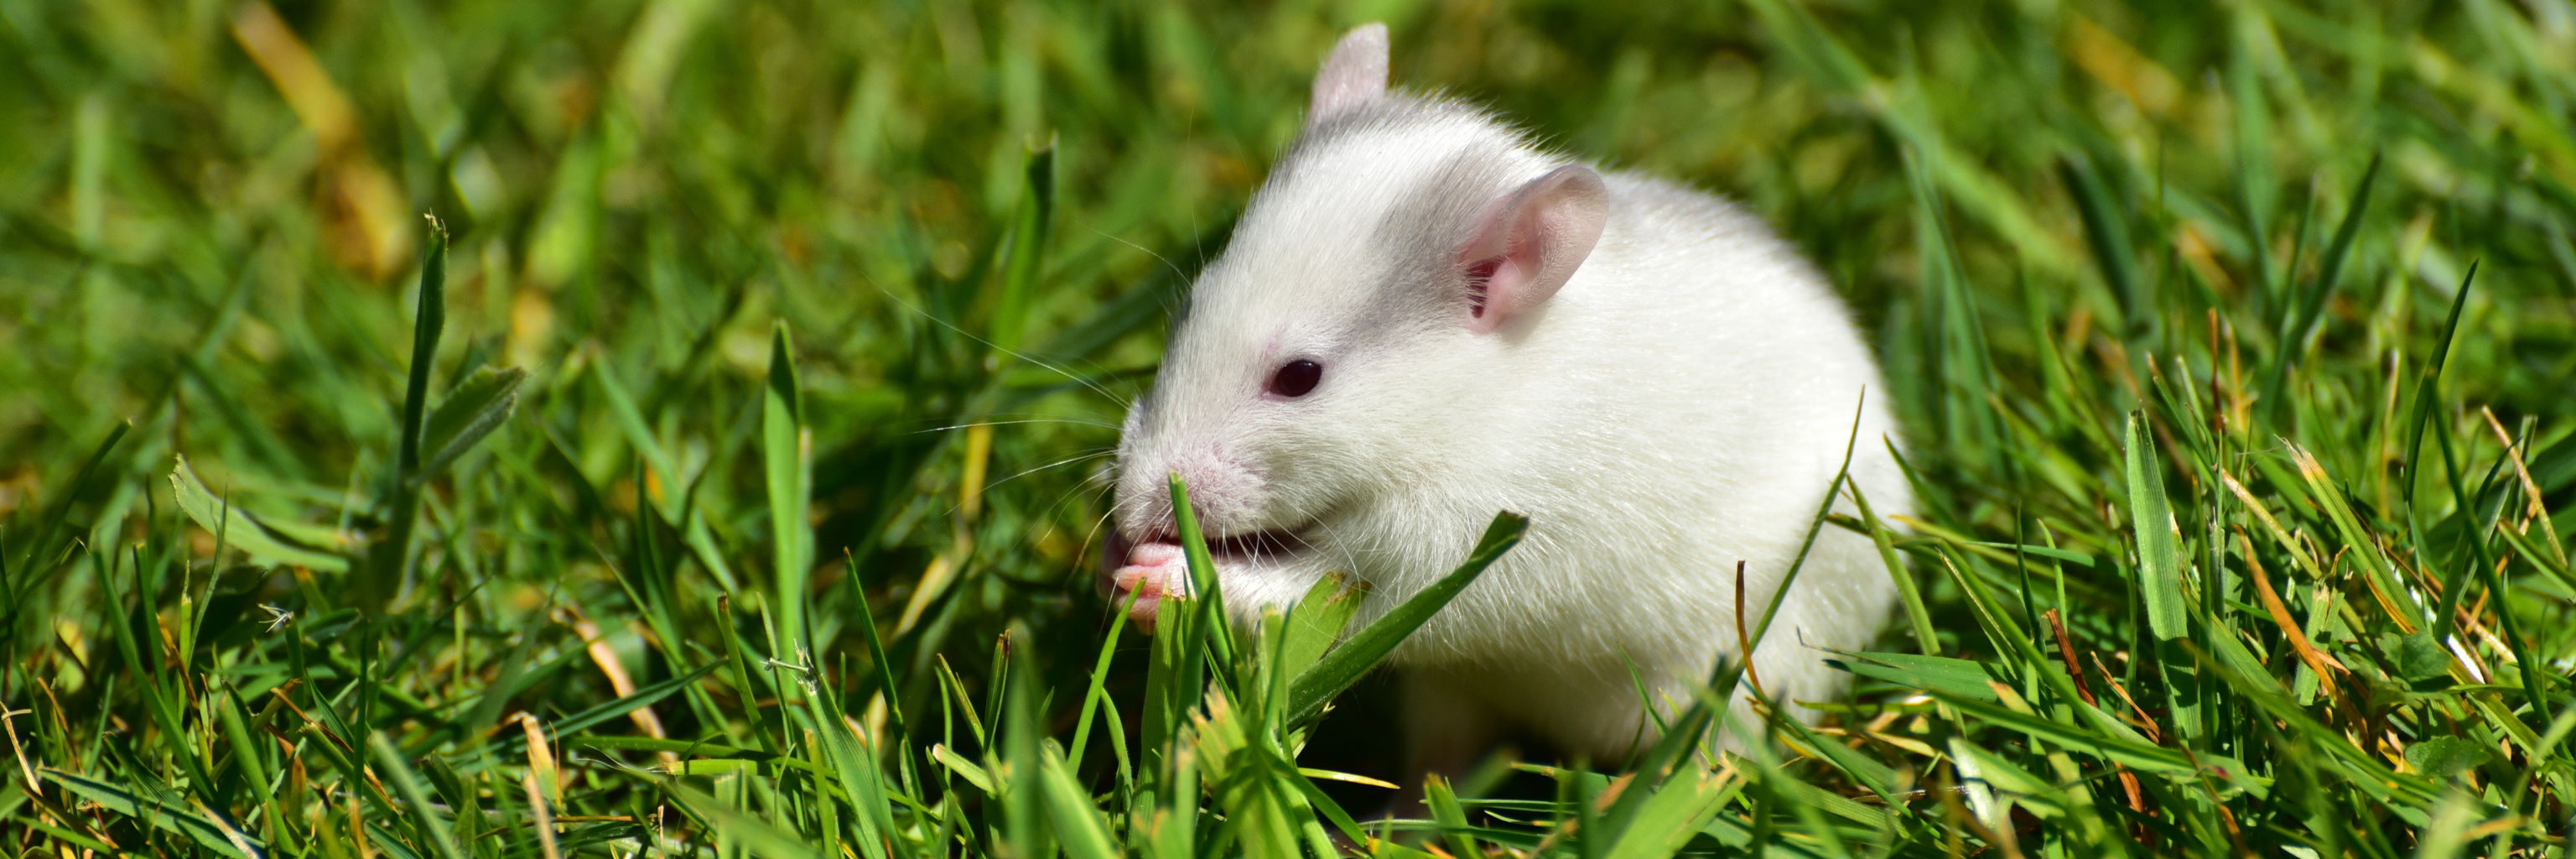 A white rat in green grass